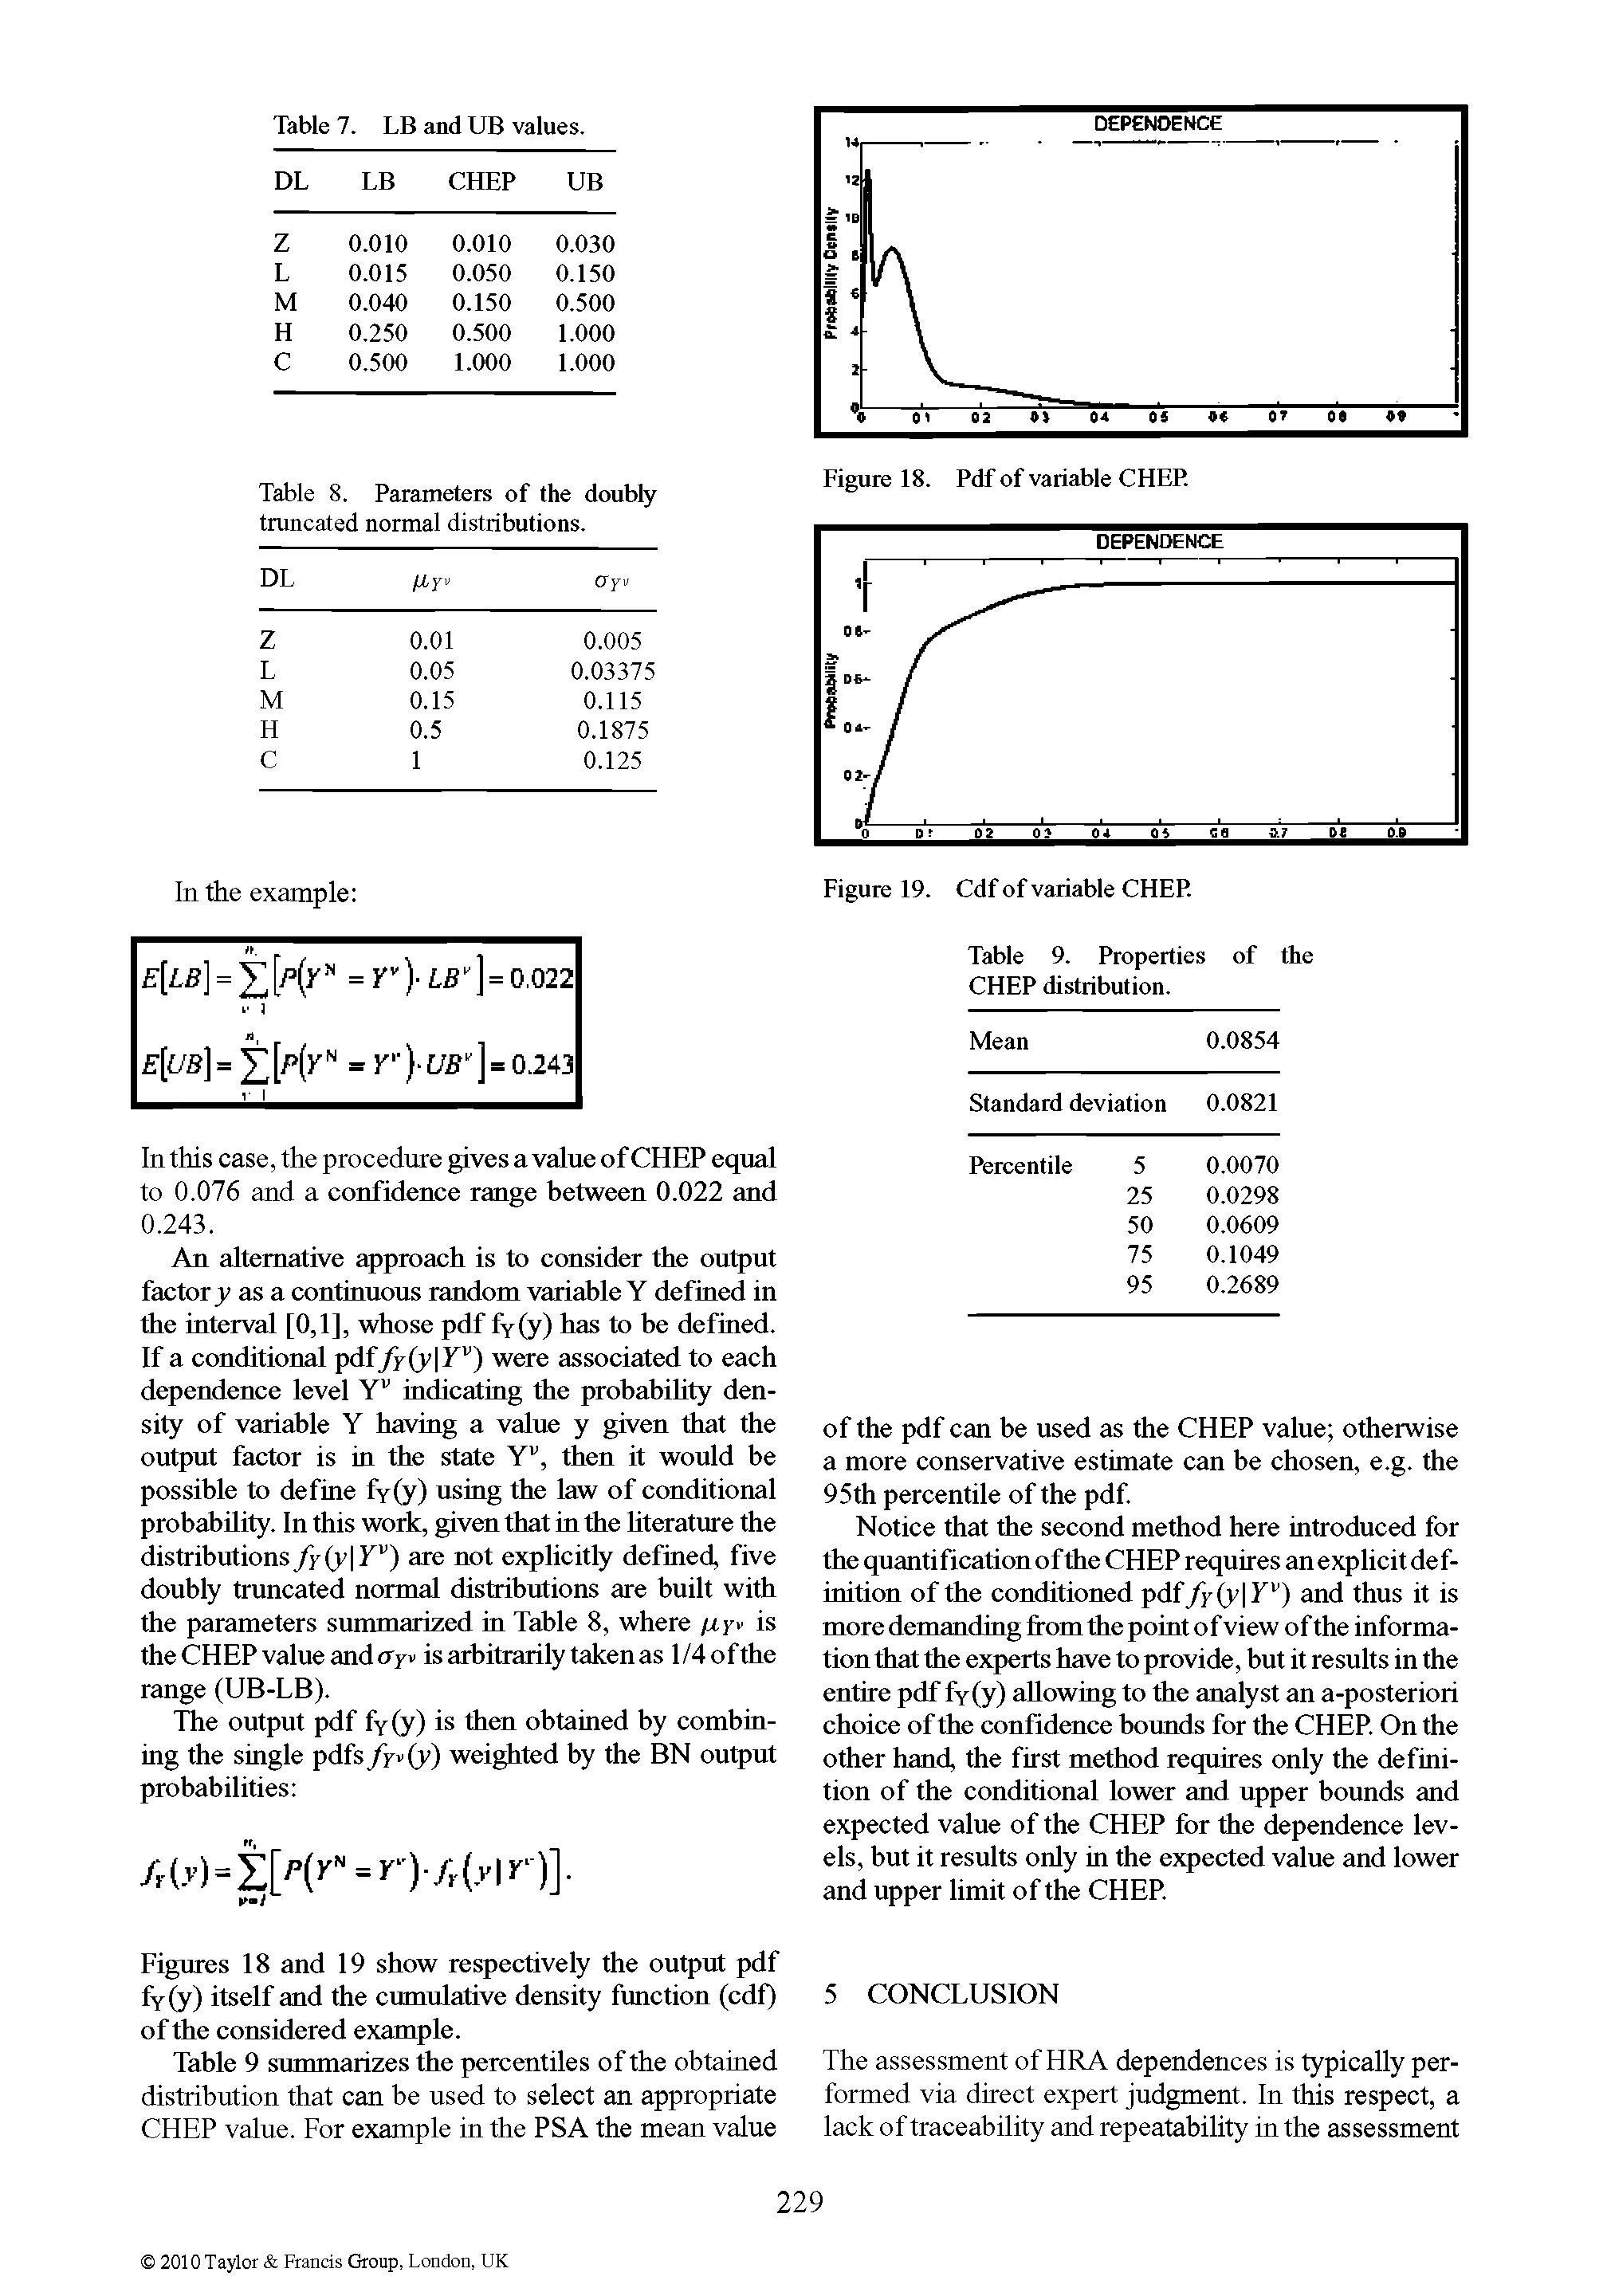 Figures 18 and 19 show respectively the output pdf fy(y) itself and the cumulative density function (cdf) of the considered example.